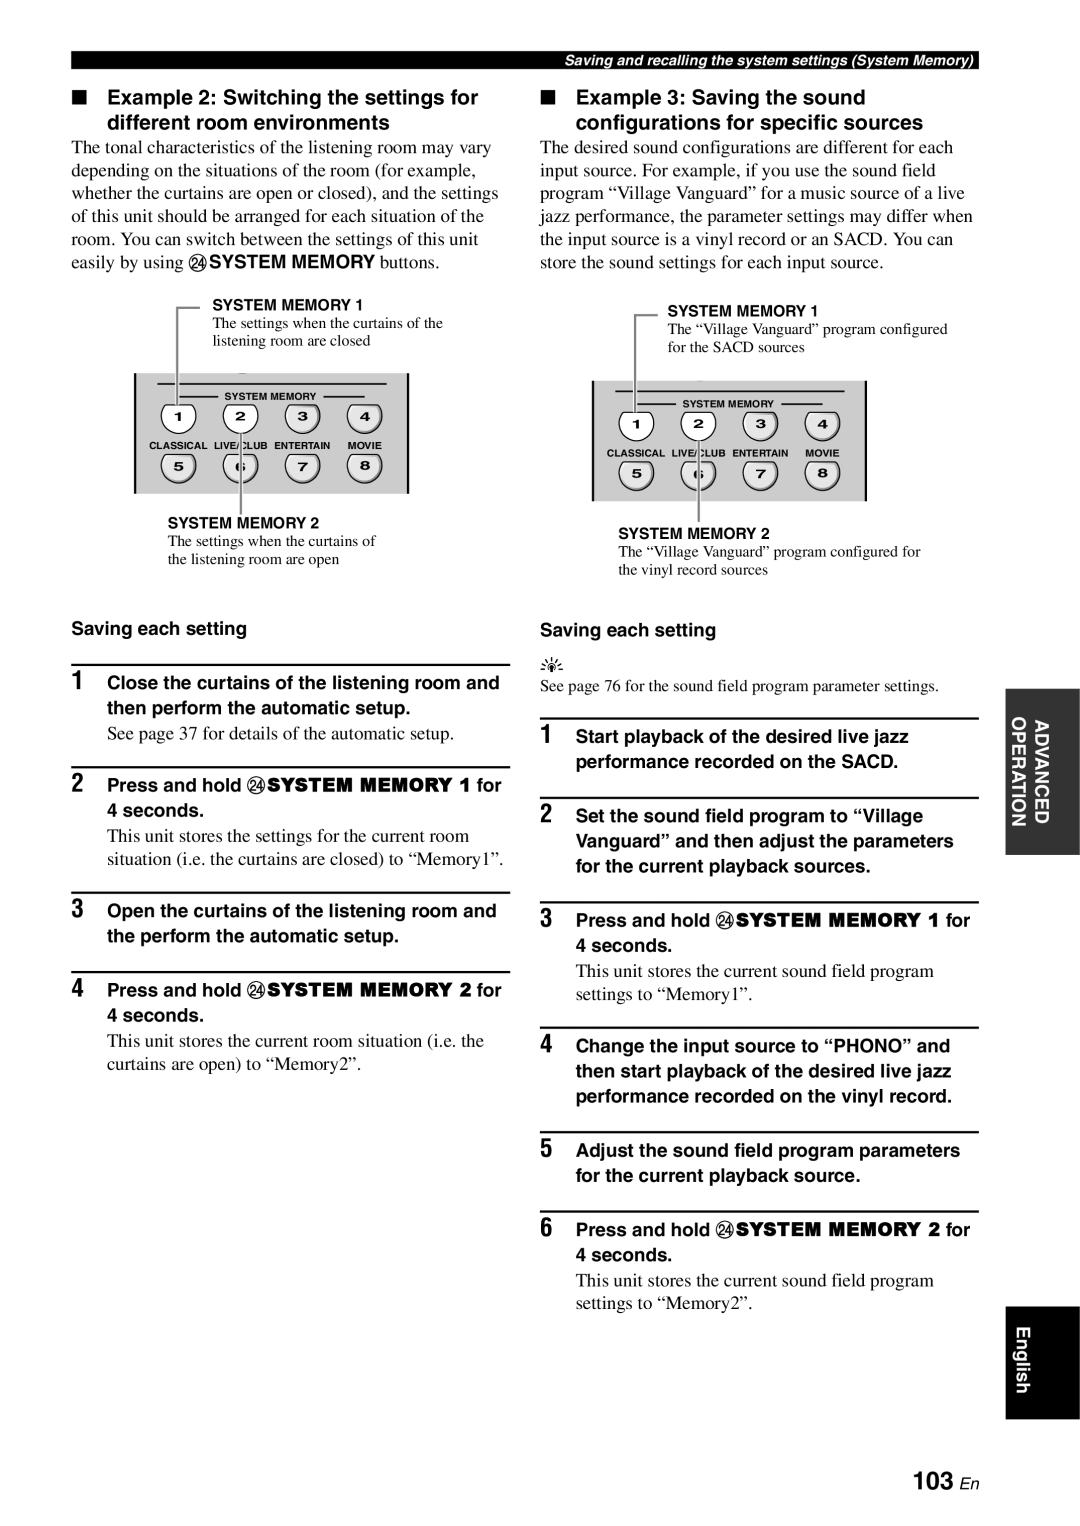 Yamaha RX-V3800 owner manual 103 En, Example 2 Switching the settings for different room environments, Saving each setting 